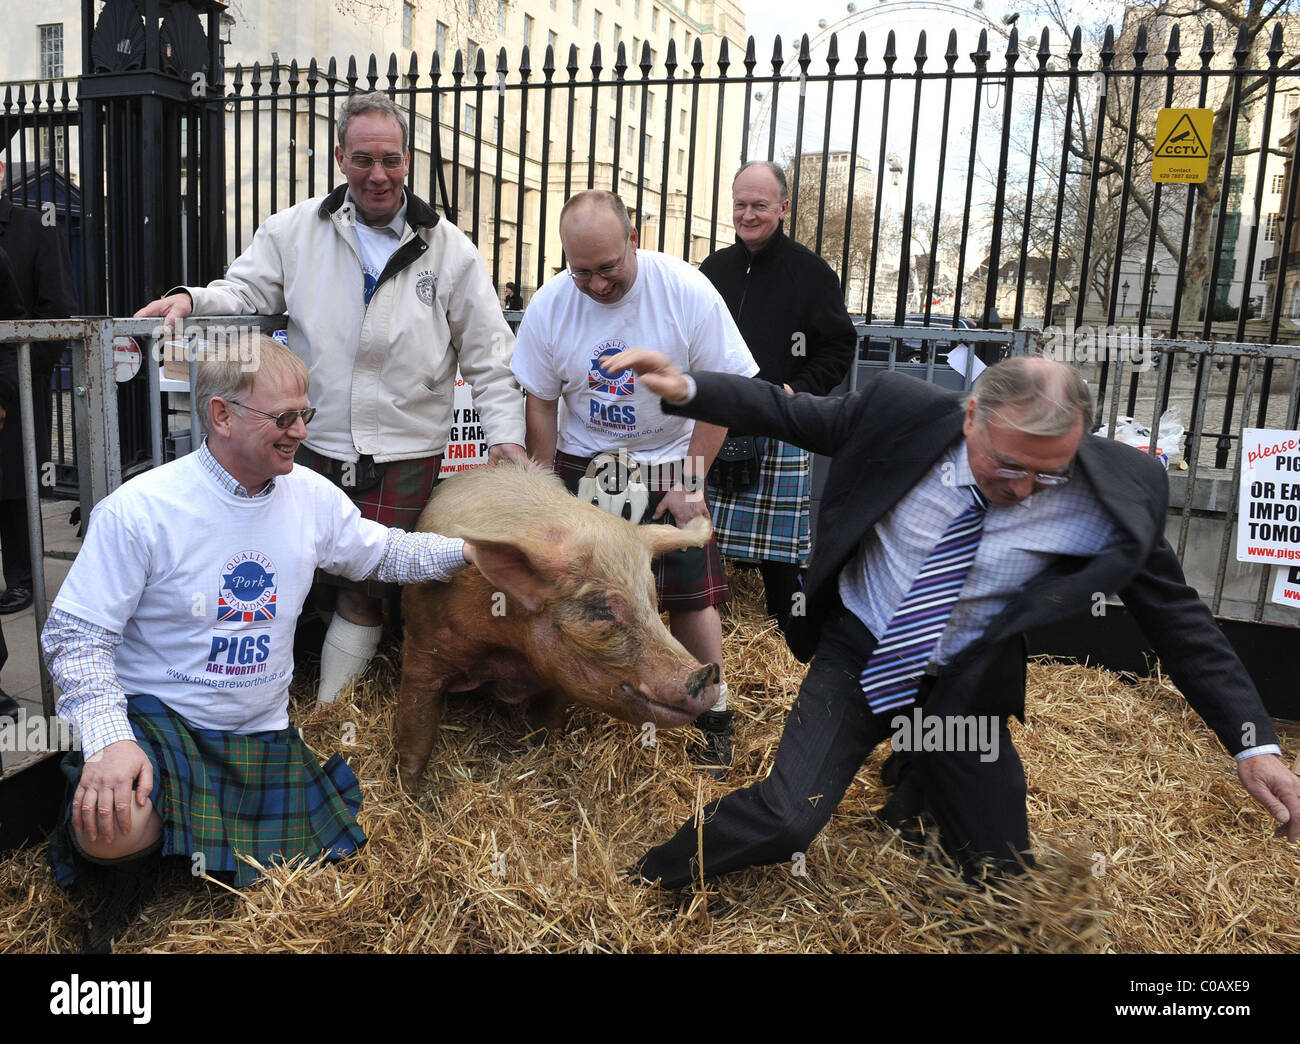 Winnie the pig gives a push to Malcolm Bruce, MP for Gordon while being watched by pig farmers Pig farmers' demonstration held Stock Photo